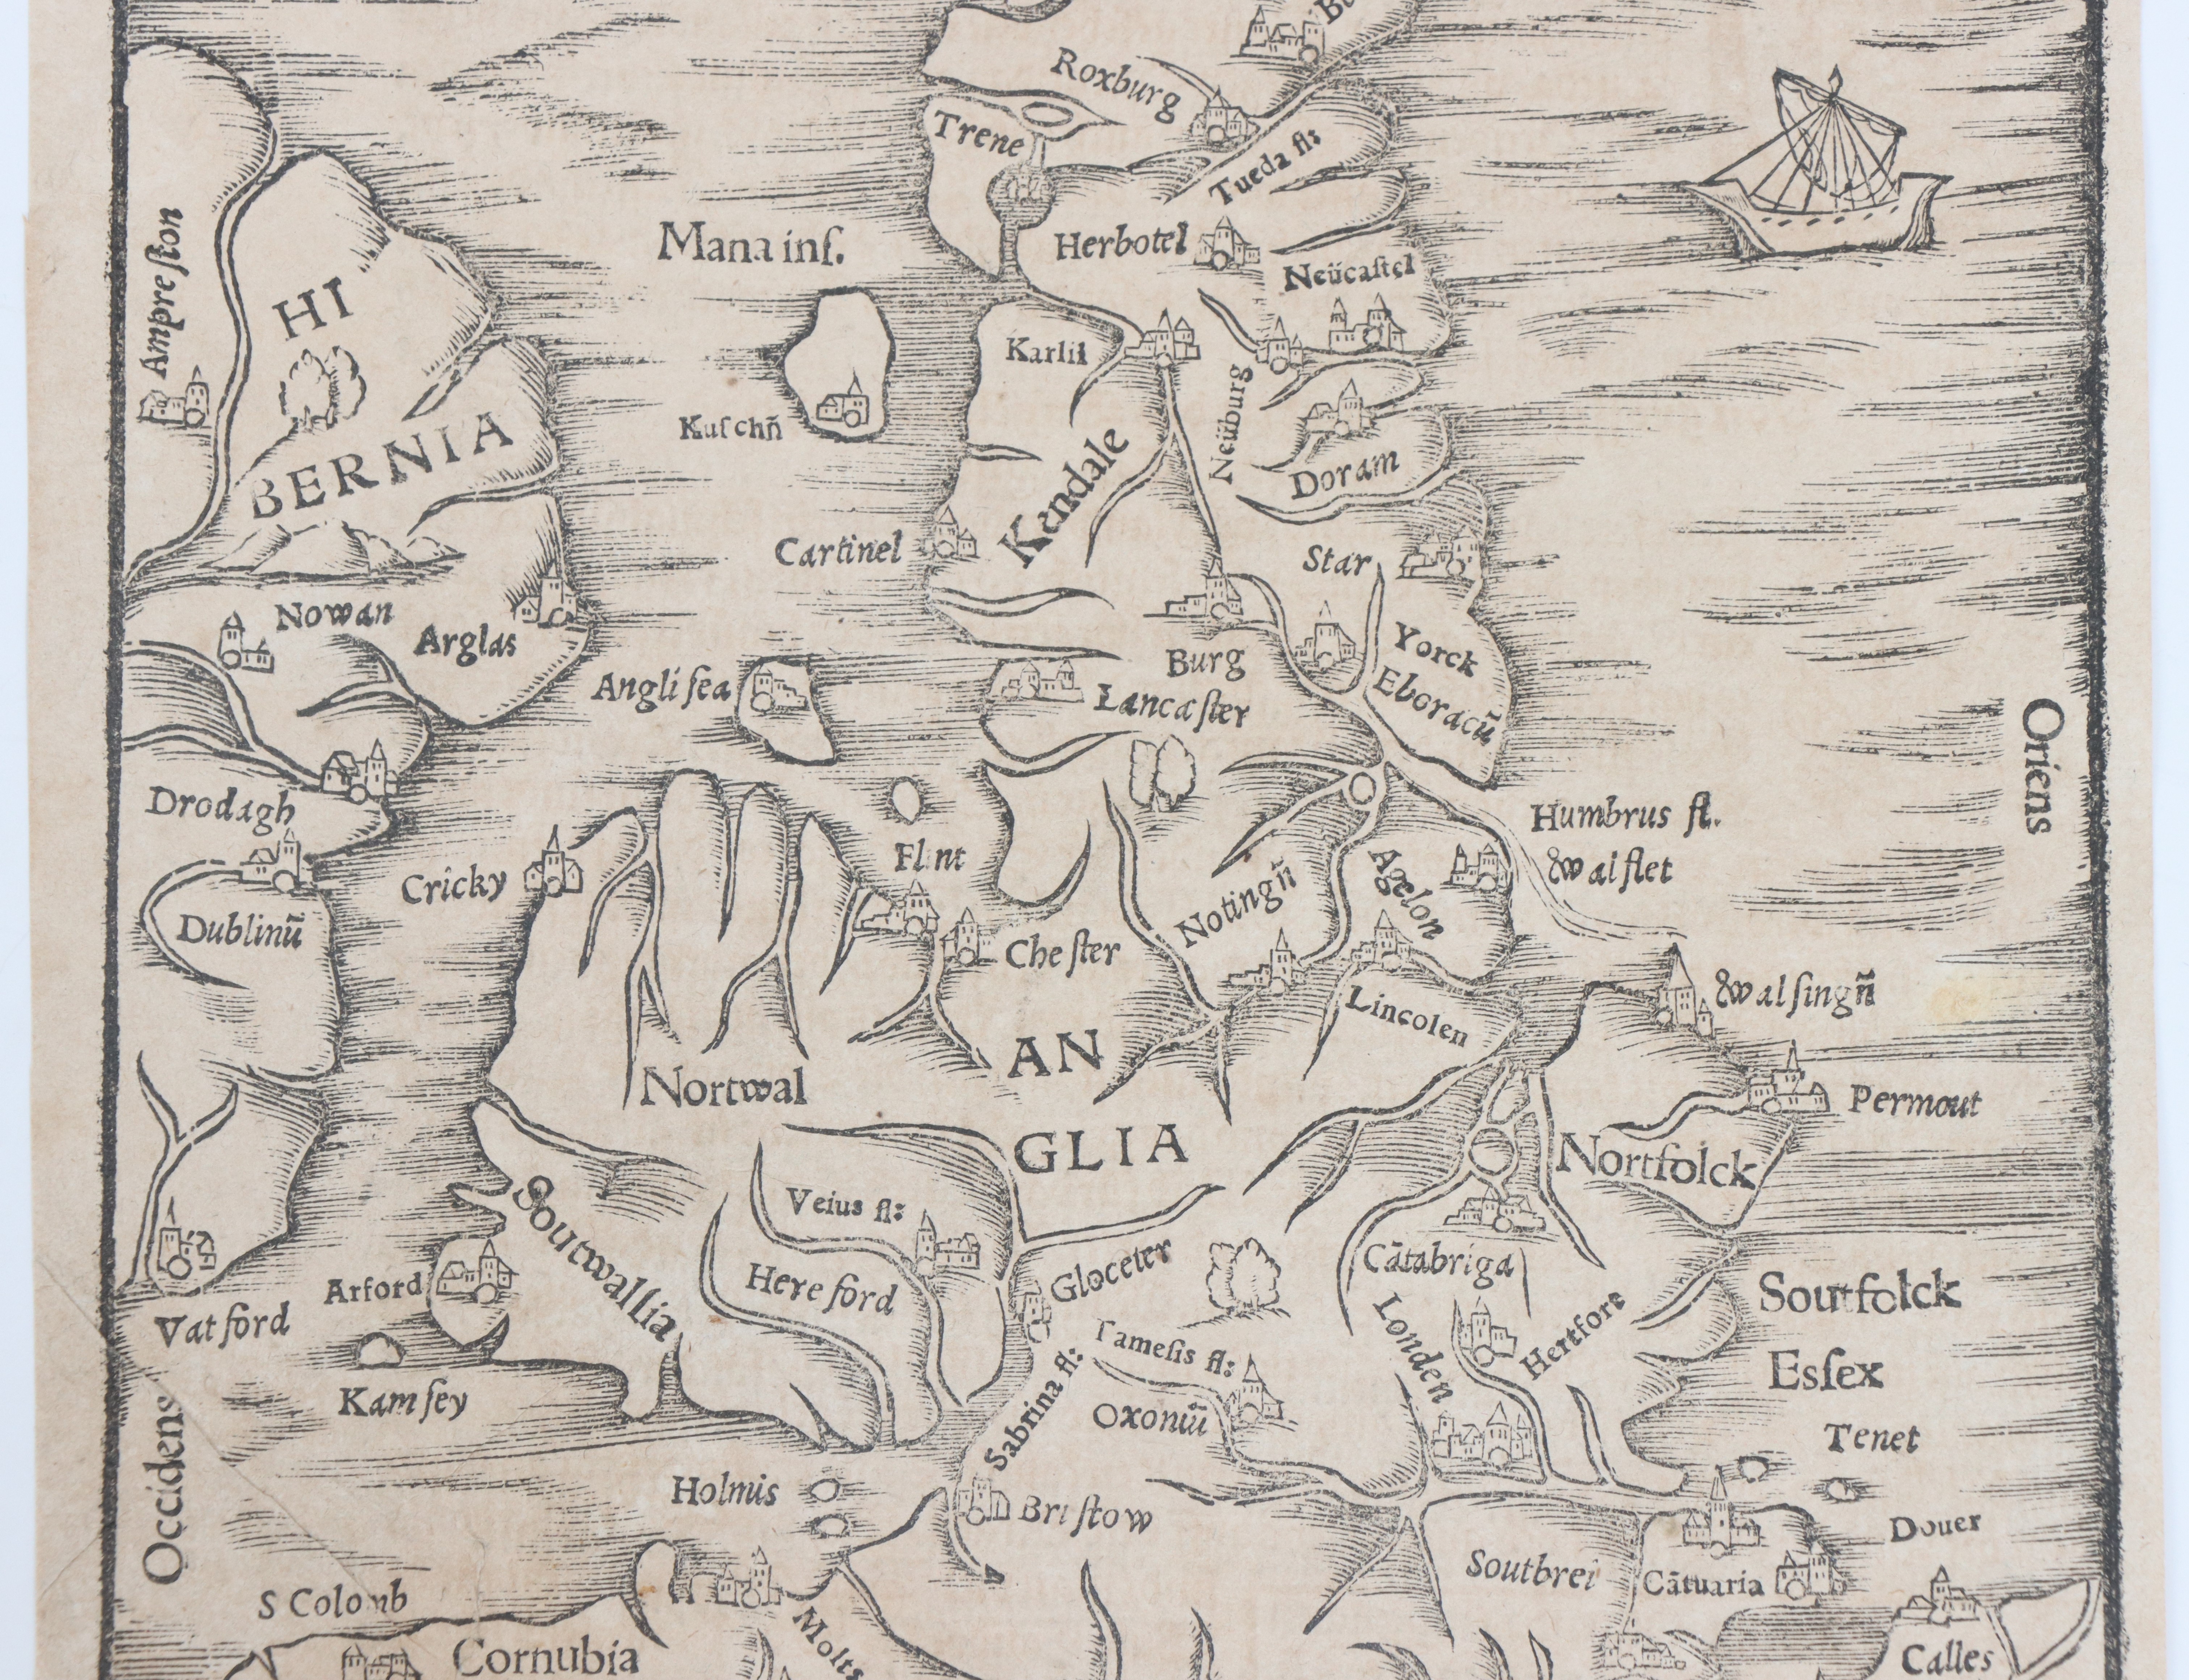 16th Century Map Of The British Isles - Image 3 of 8